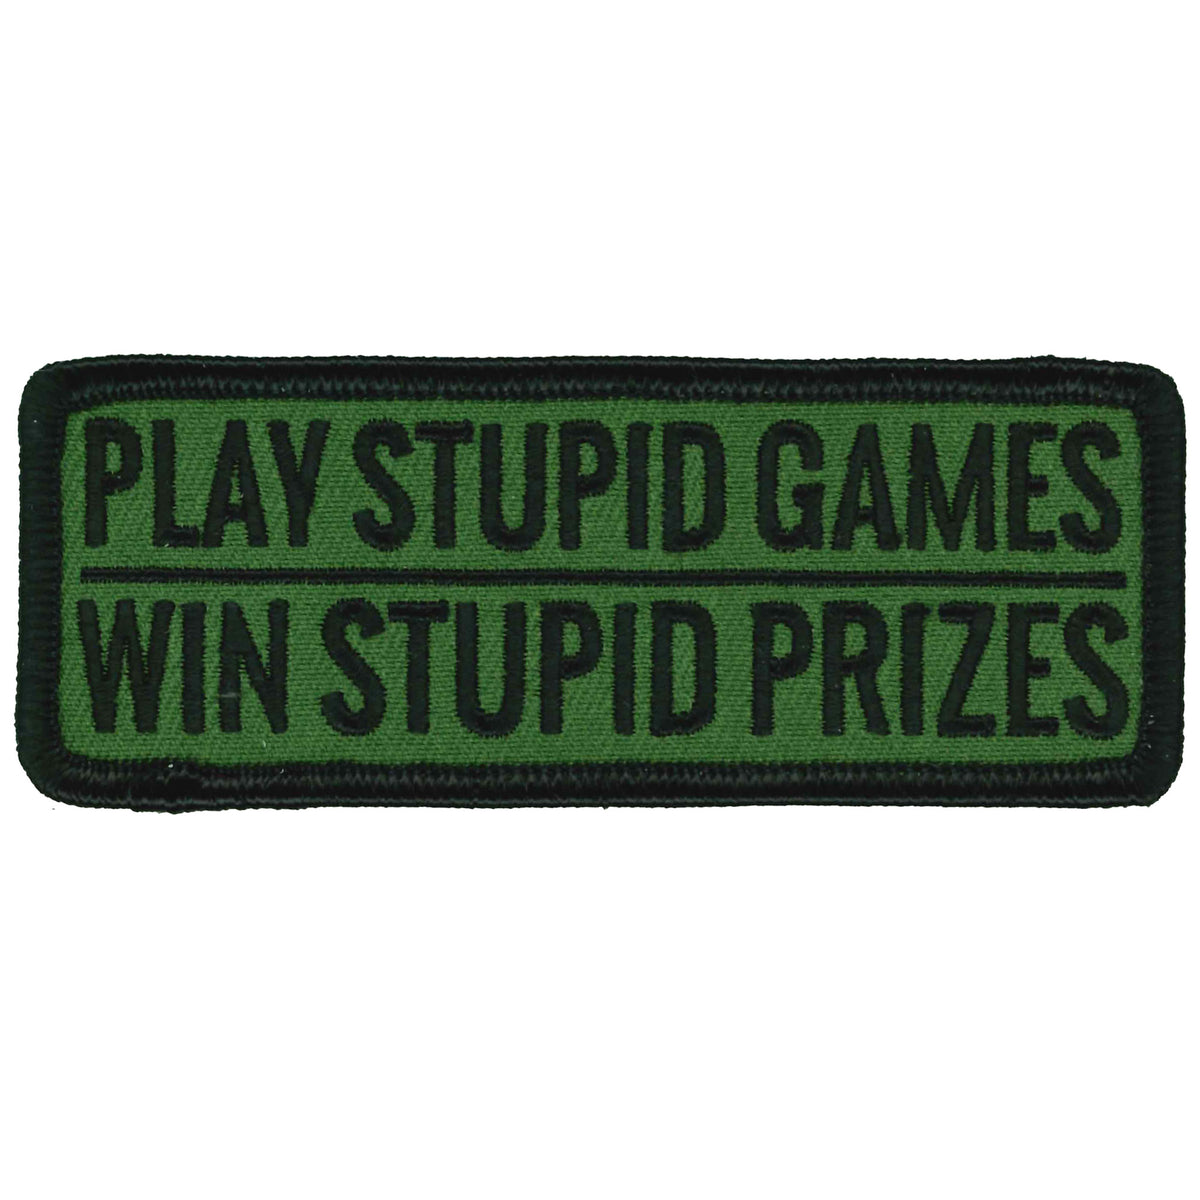 Hot Leathers Play Stupid Games Win Stupid Prizes 4" X 2" Patch